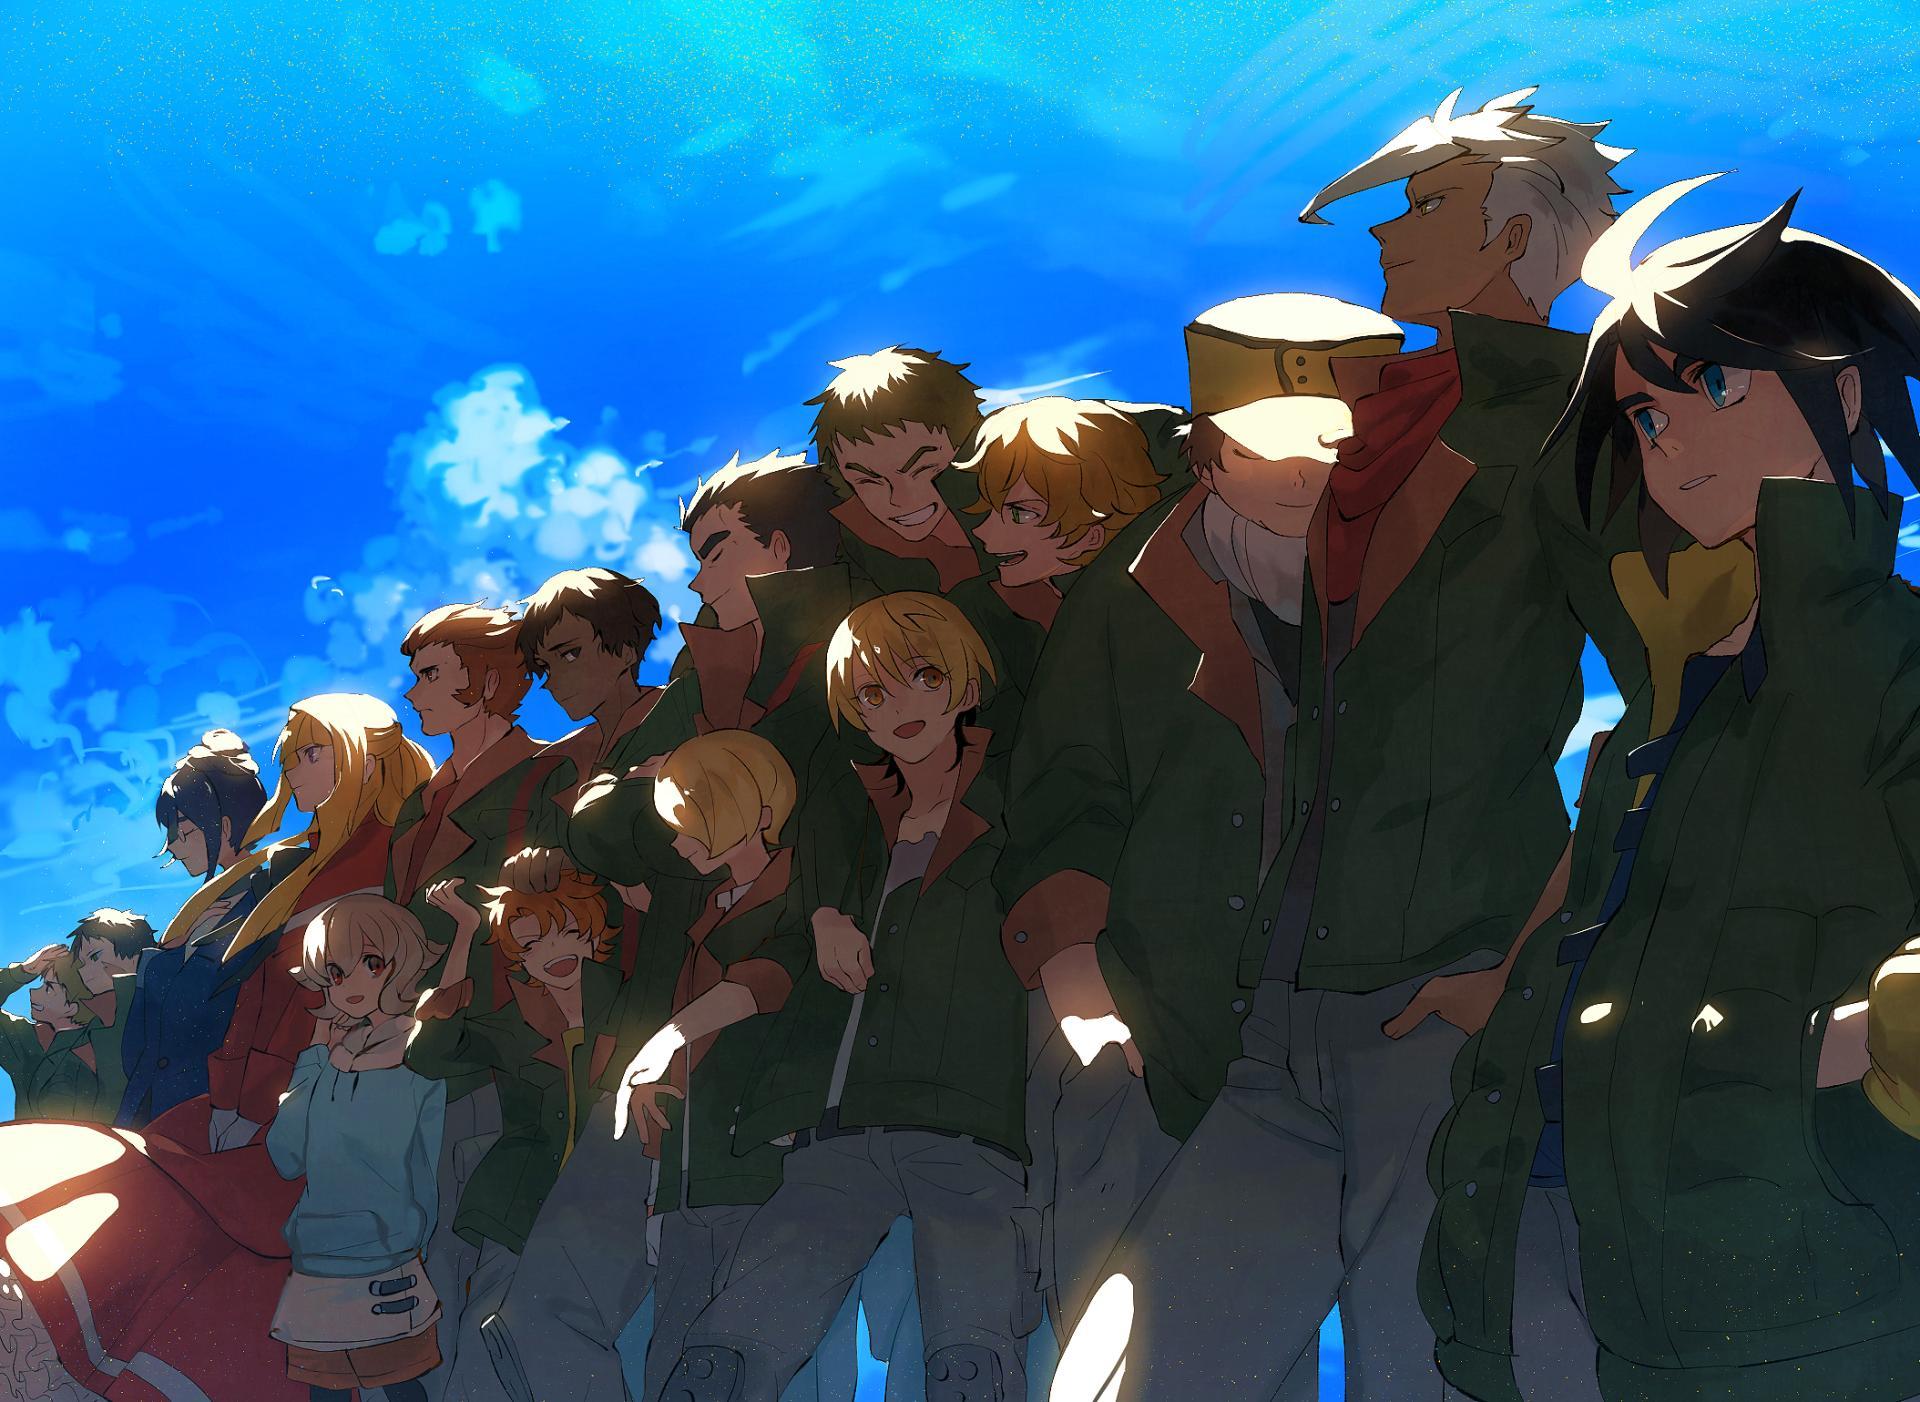 Mobile Suit Gundam Iron Blooded Orphans Wallpaper HD Download